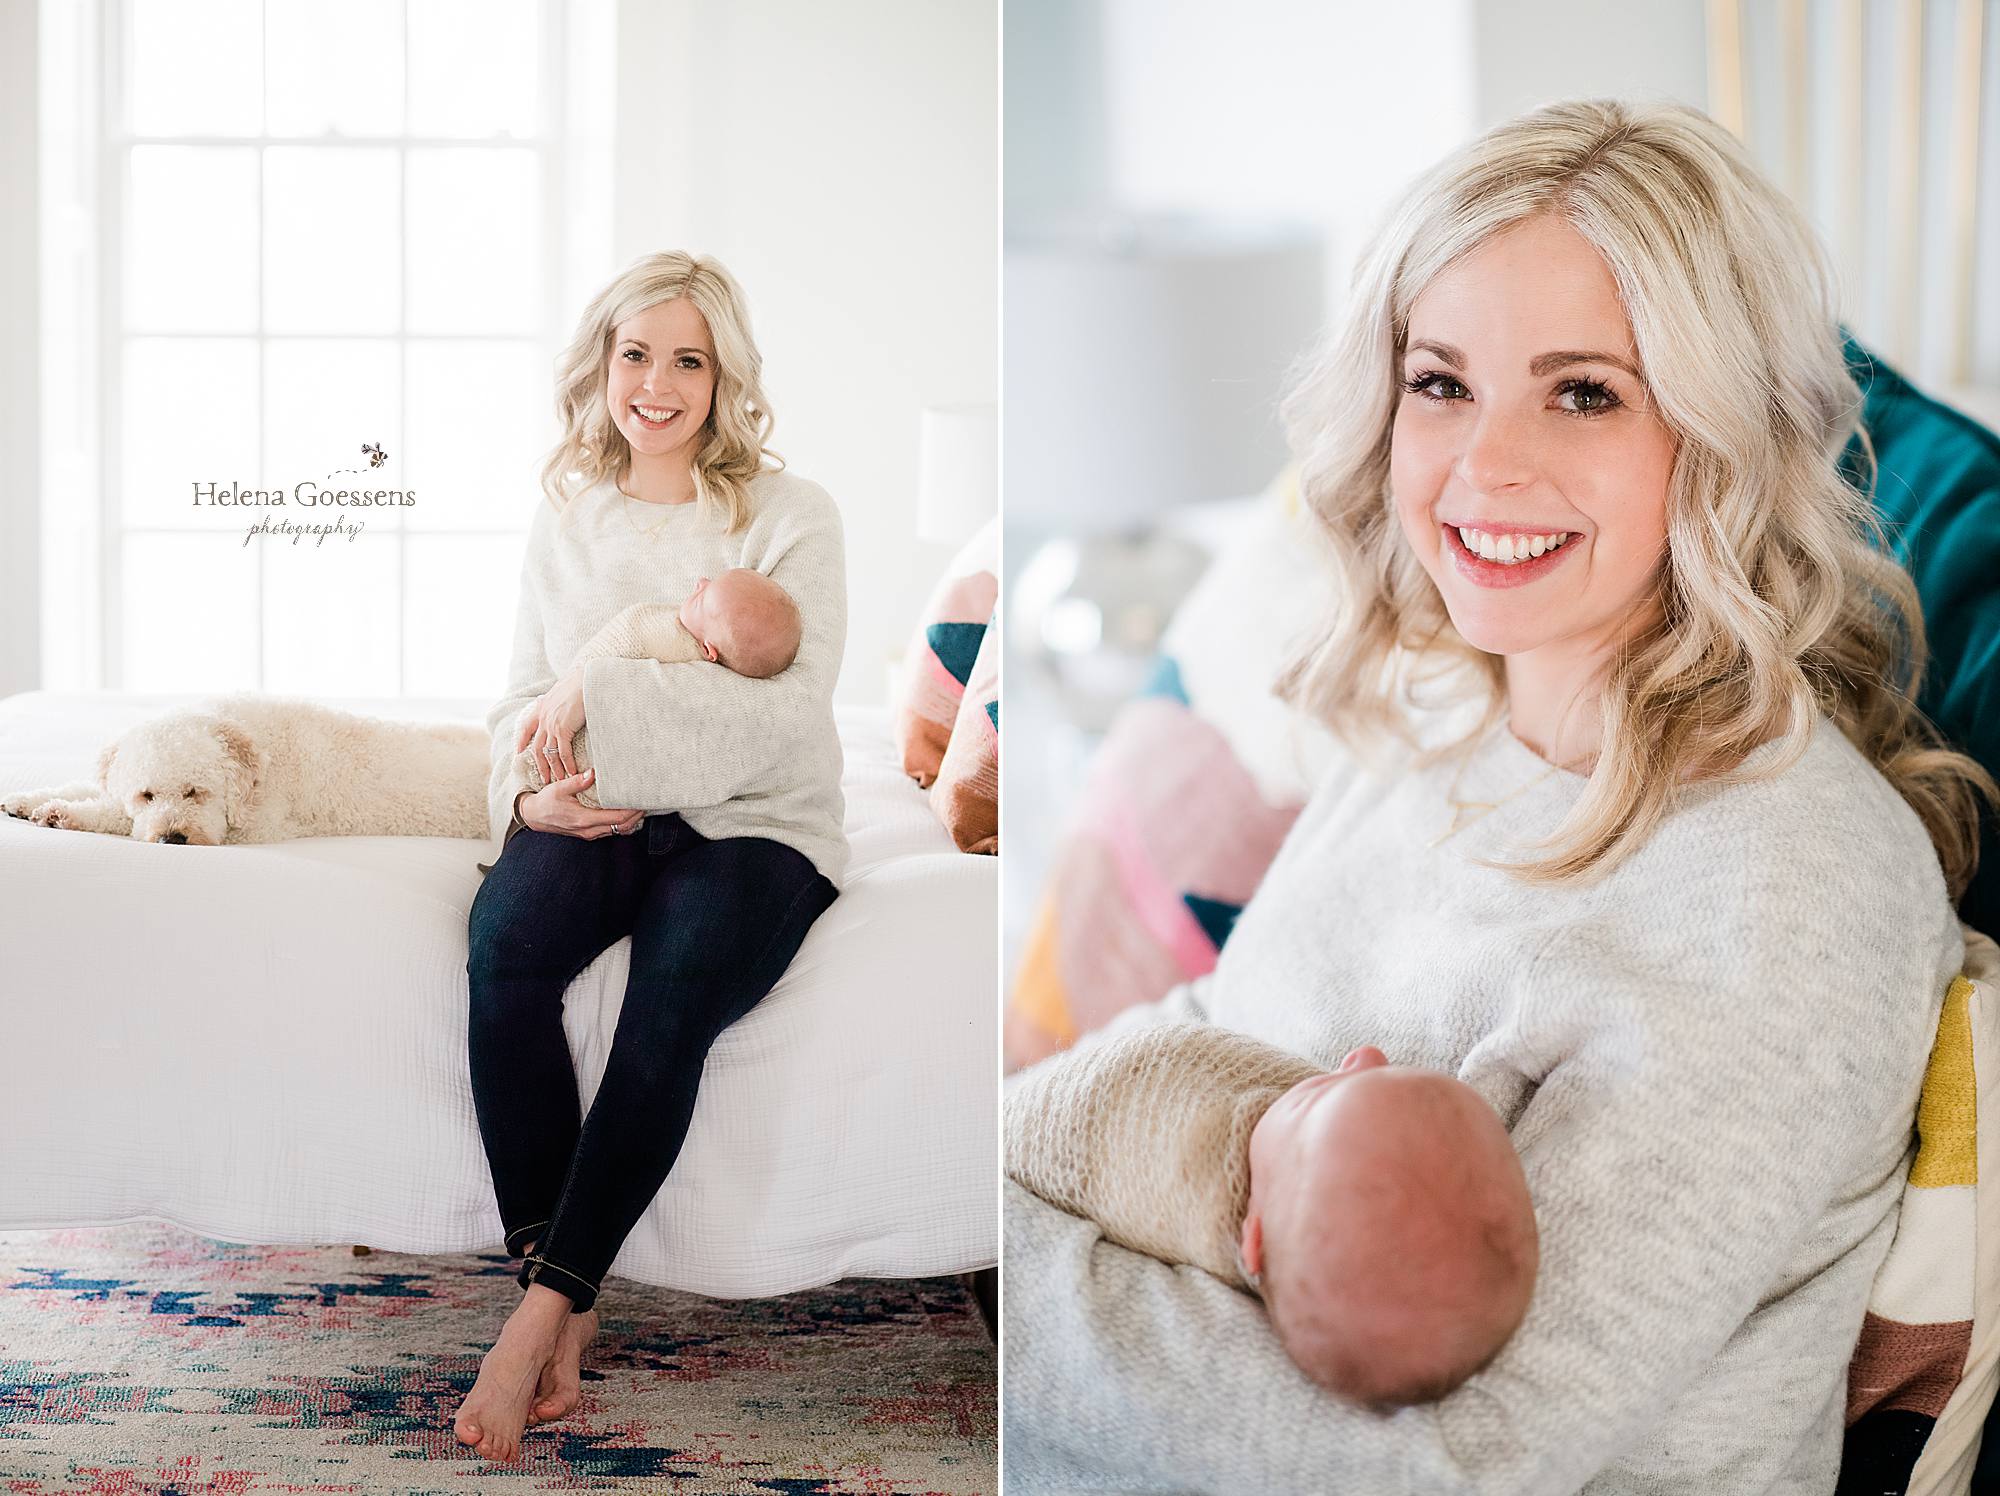 Helena Goessens Photography photographs new mom rocking baby boy on bed in Milton MA home